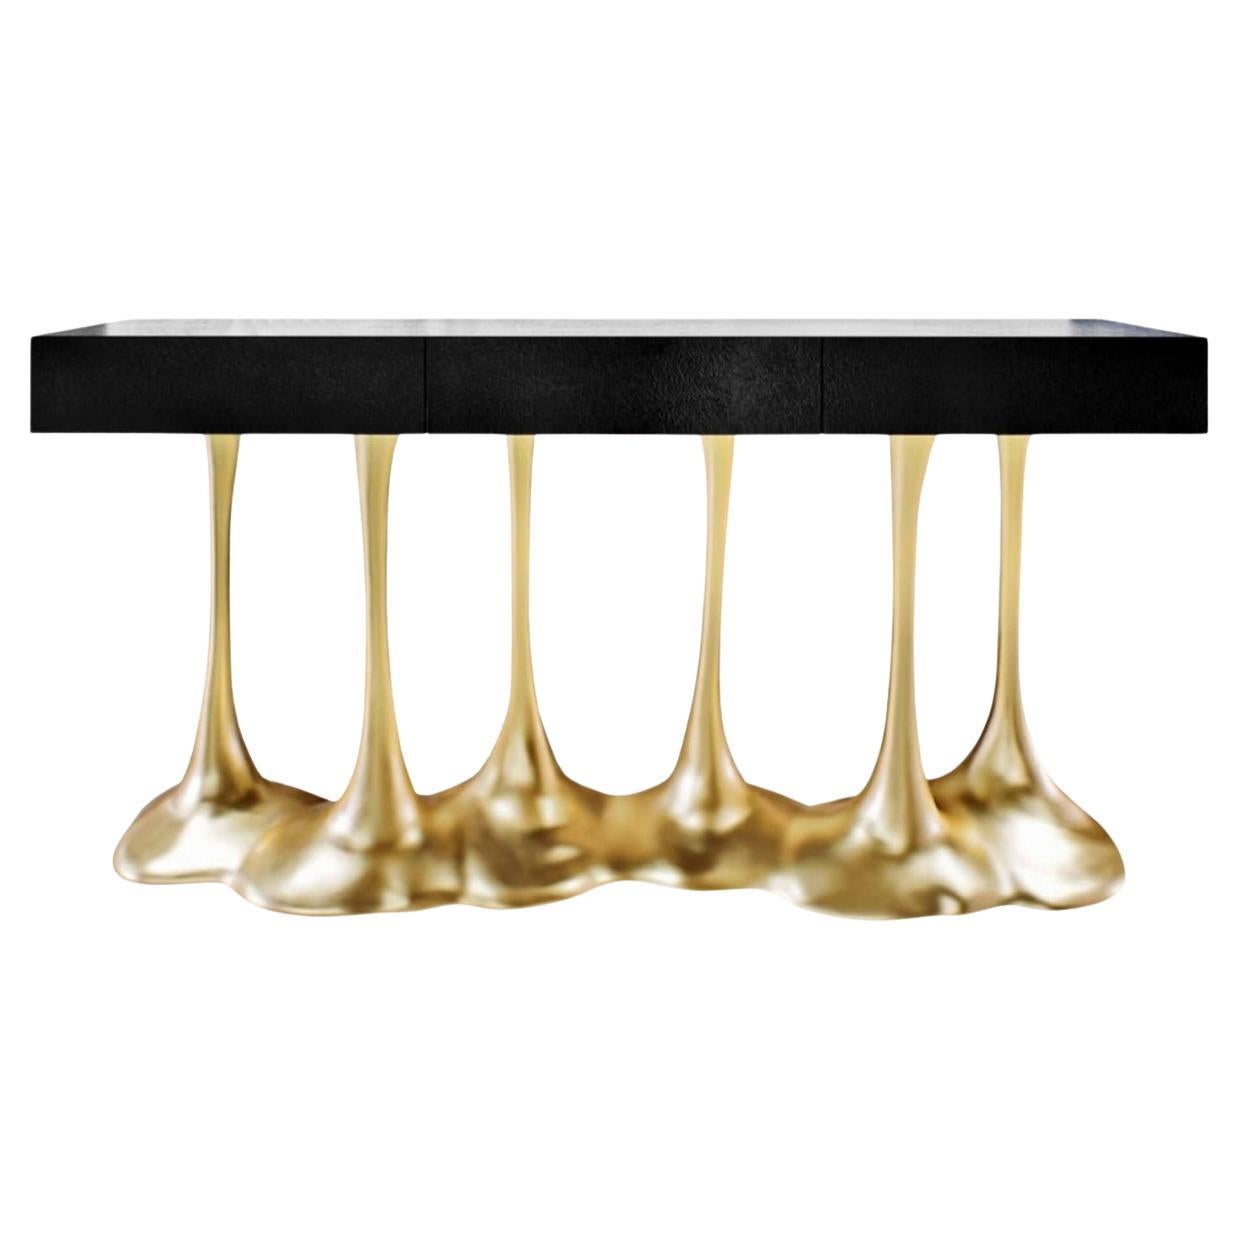 New Design Console in Wood finished in Black High Gloss For Sale